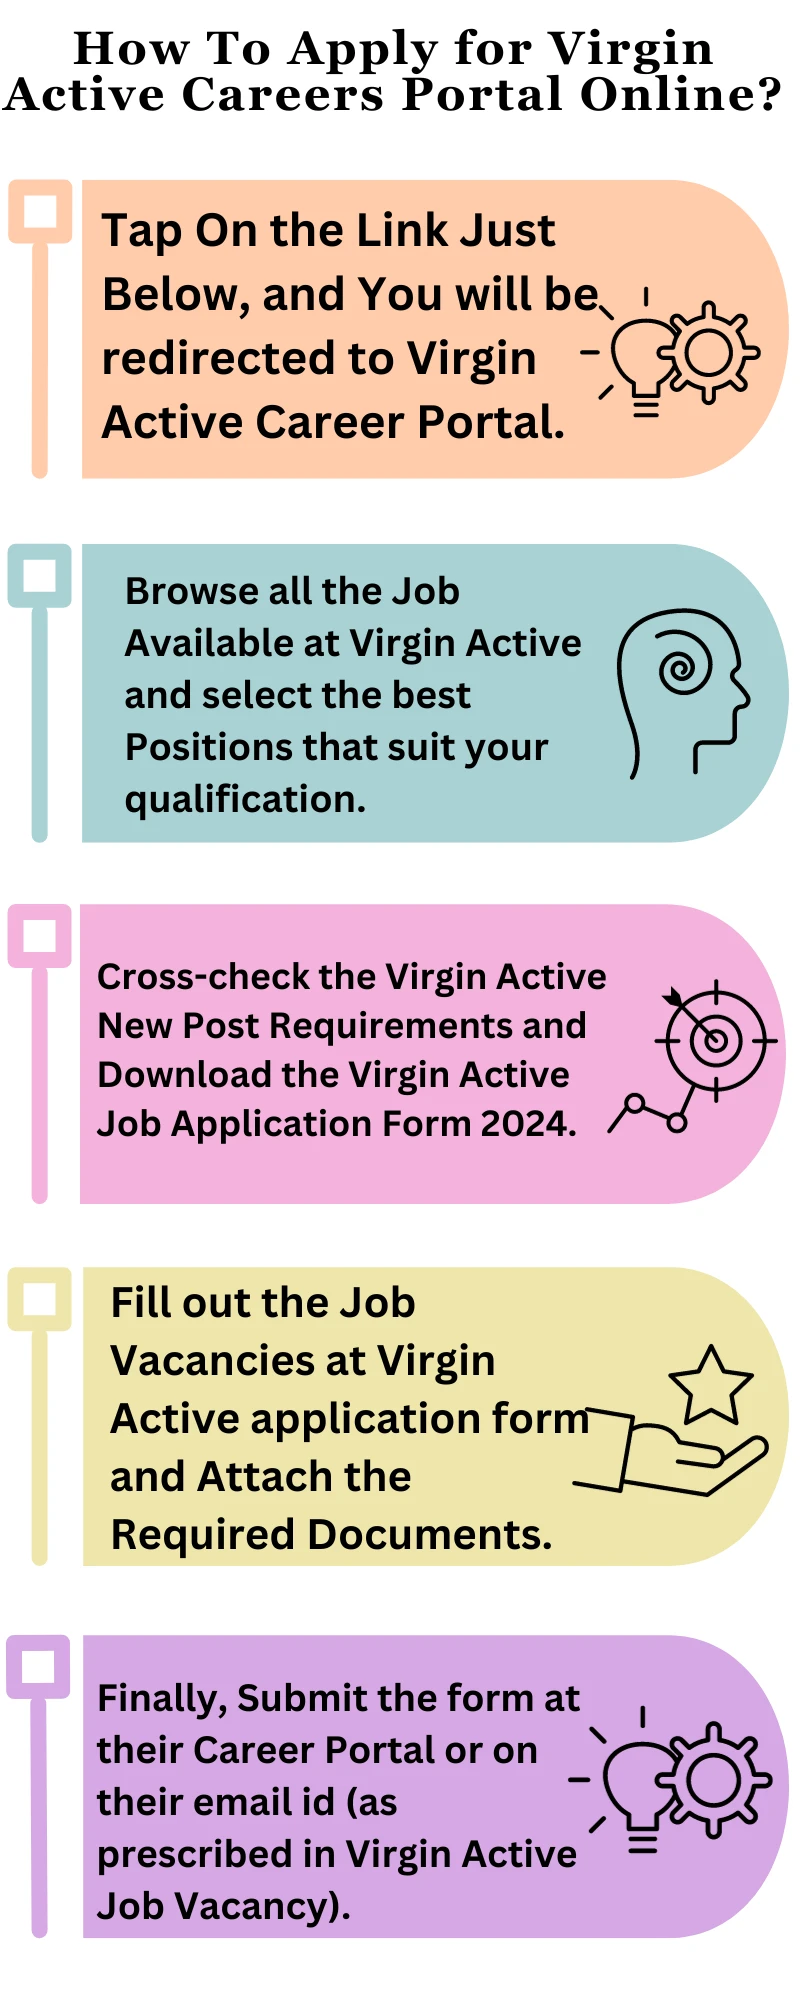 How To Apply for Virgin Active Careers Portal Online?